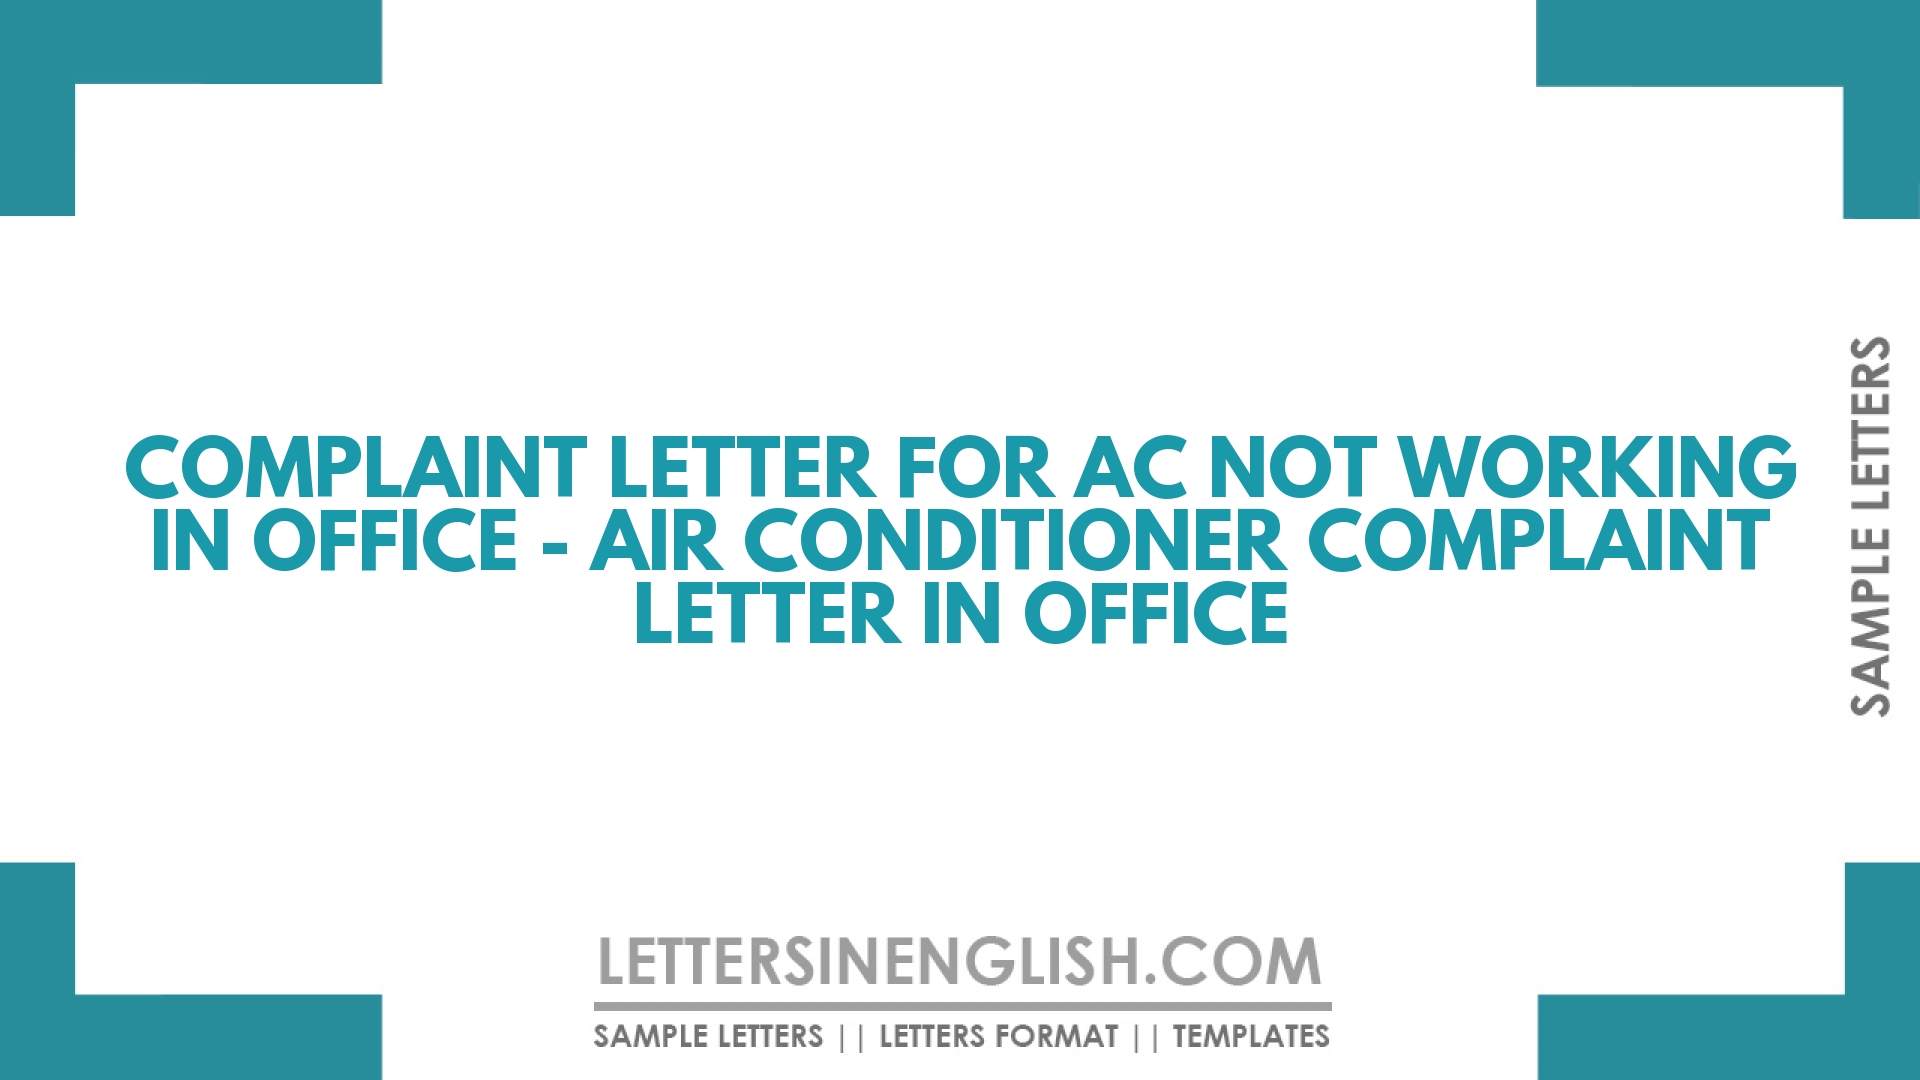 Complaint Letter for AC Not Working in Office – Air Conditioner Complaint Letter in Office